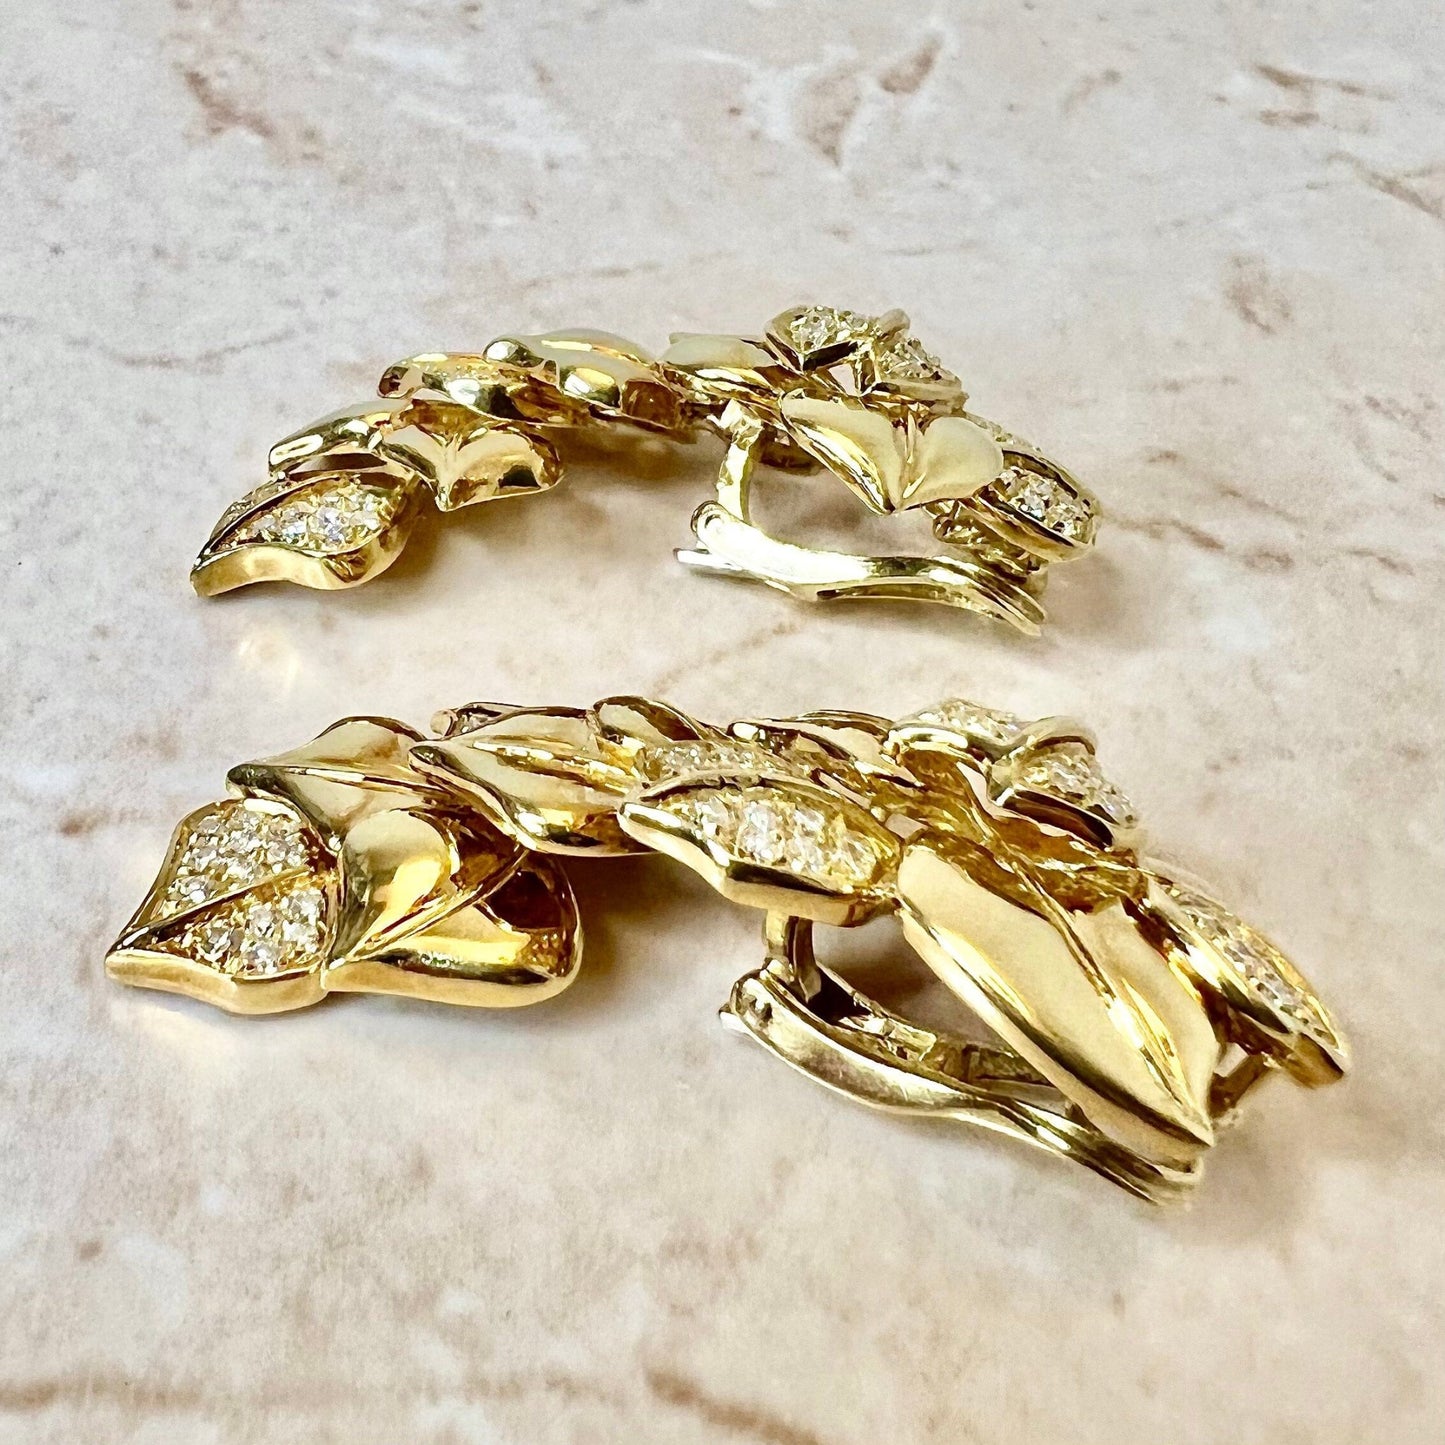 Rare Vintage Handcrafted 18K Diamond Leaf Drop Earrings - Yellow Gold Earrings - Diamond Earrings - Dangling Earrings - Best Gifts For Her